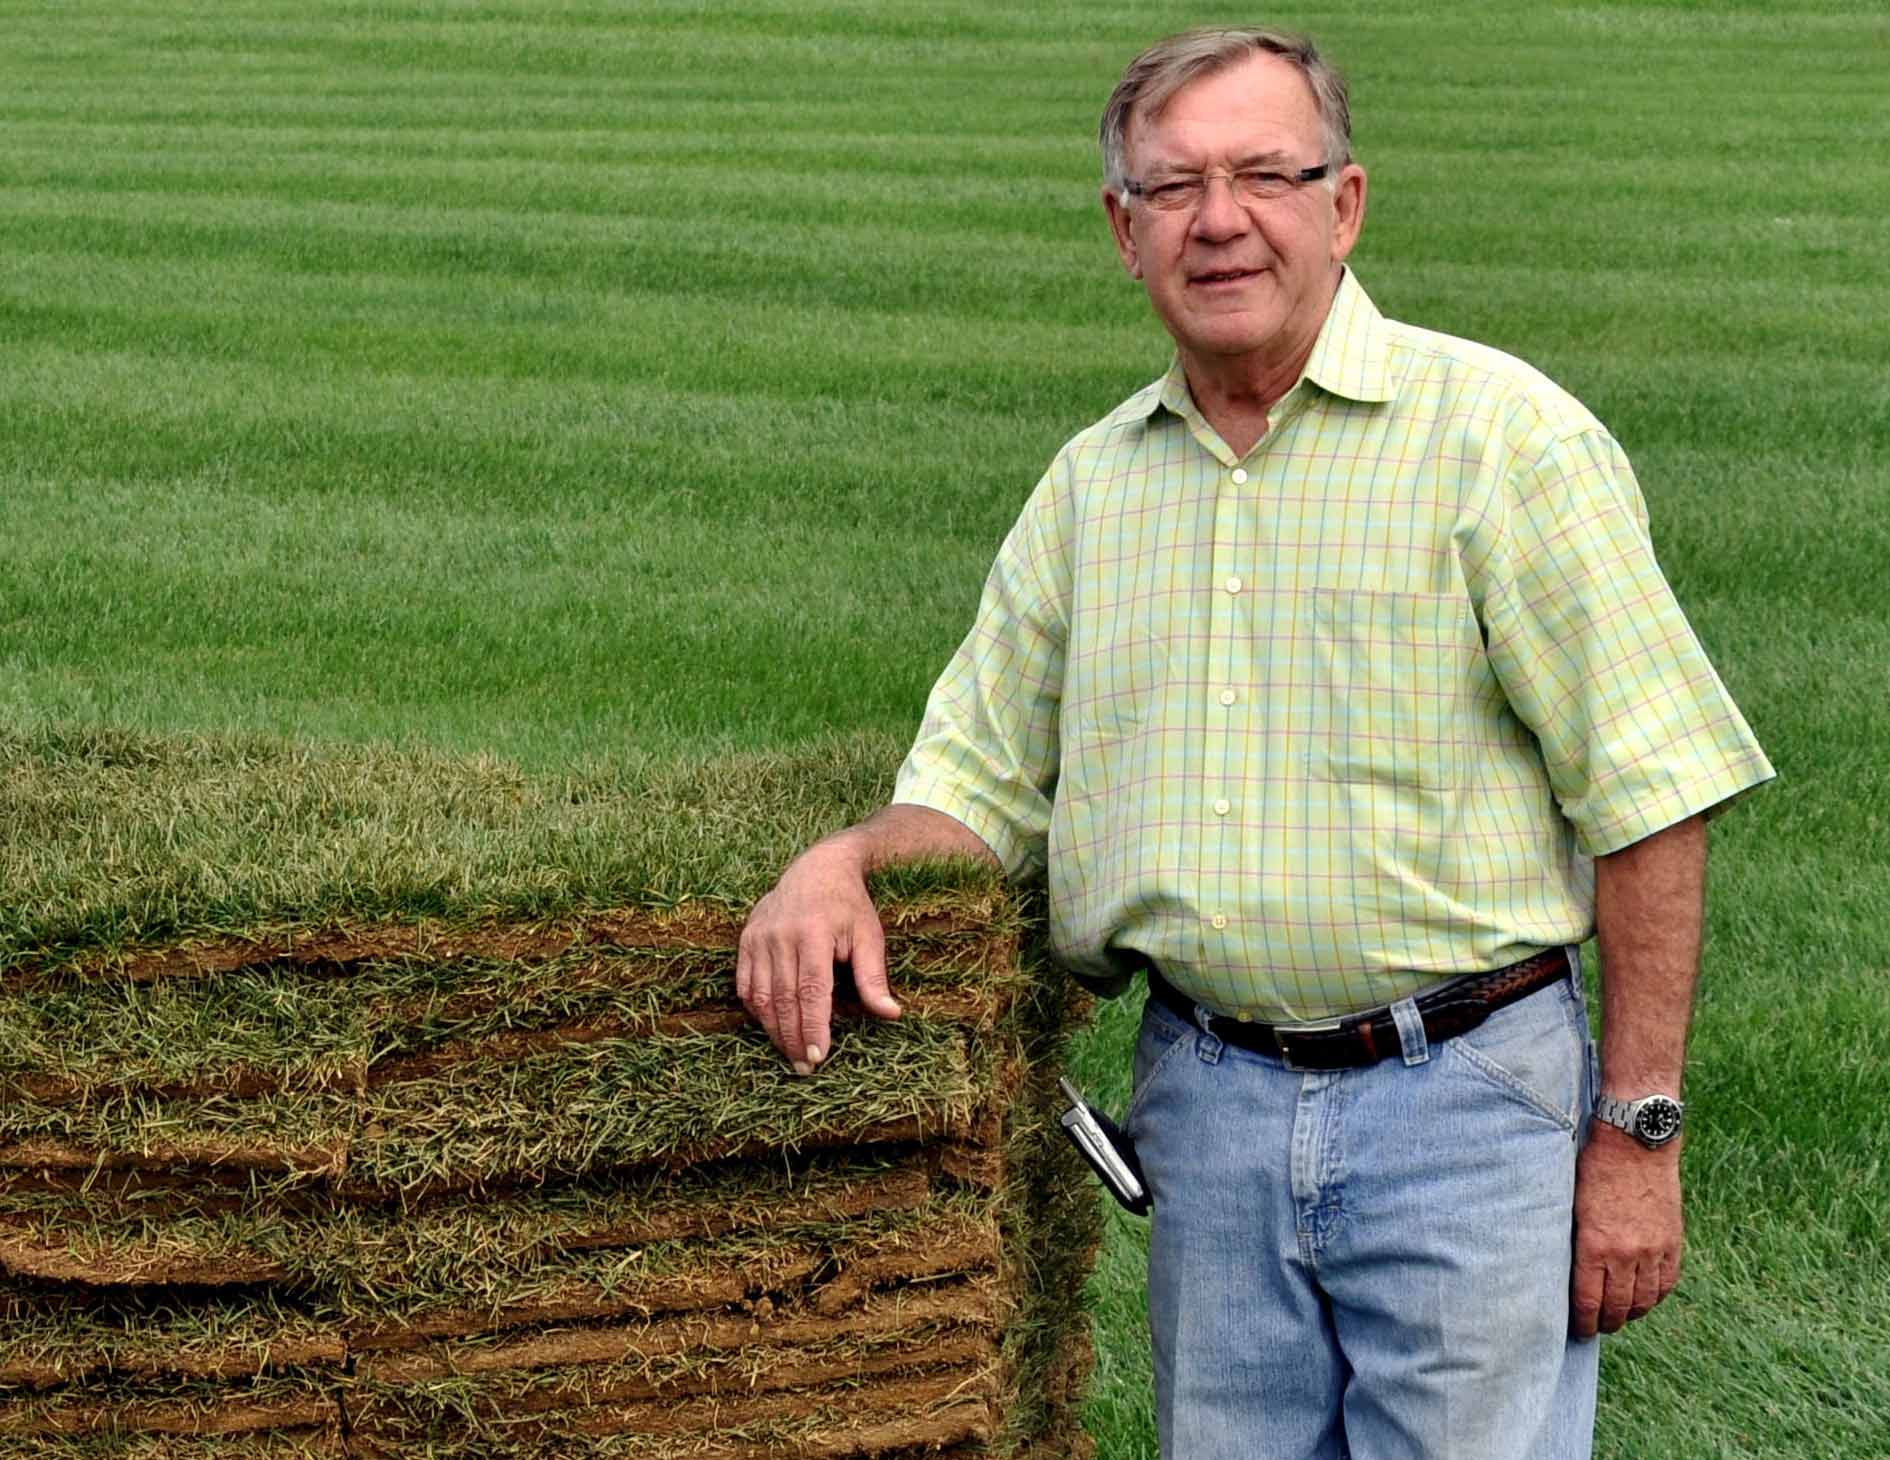 Bob Hummer with sod